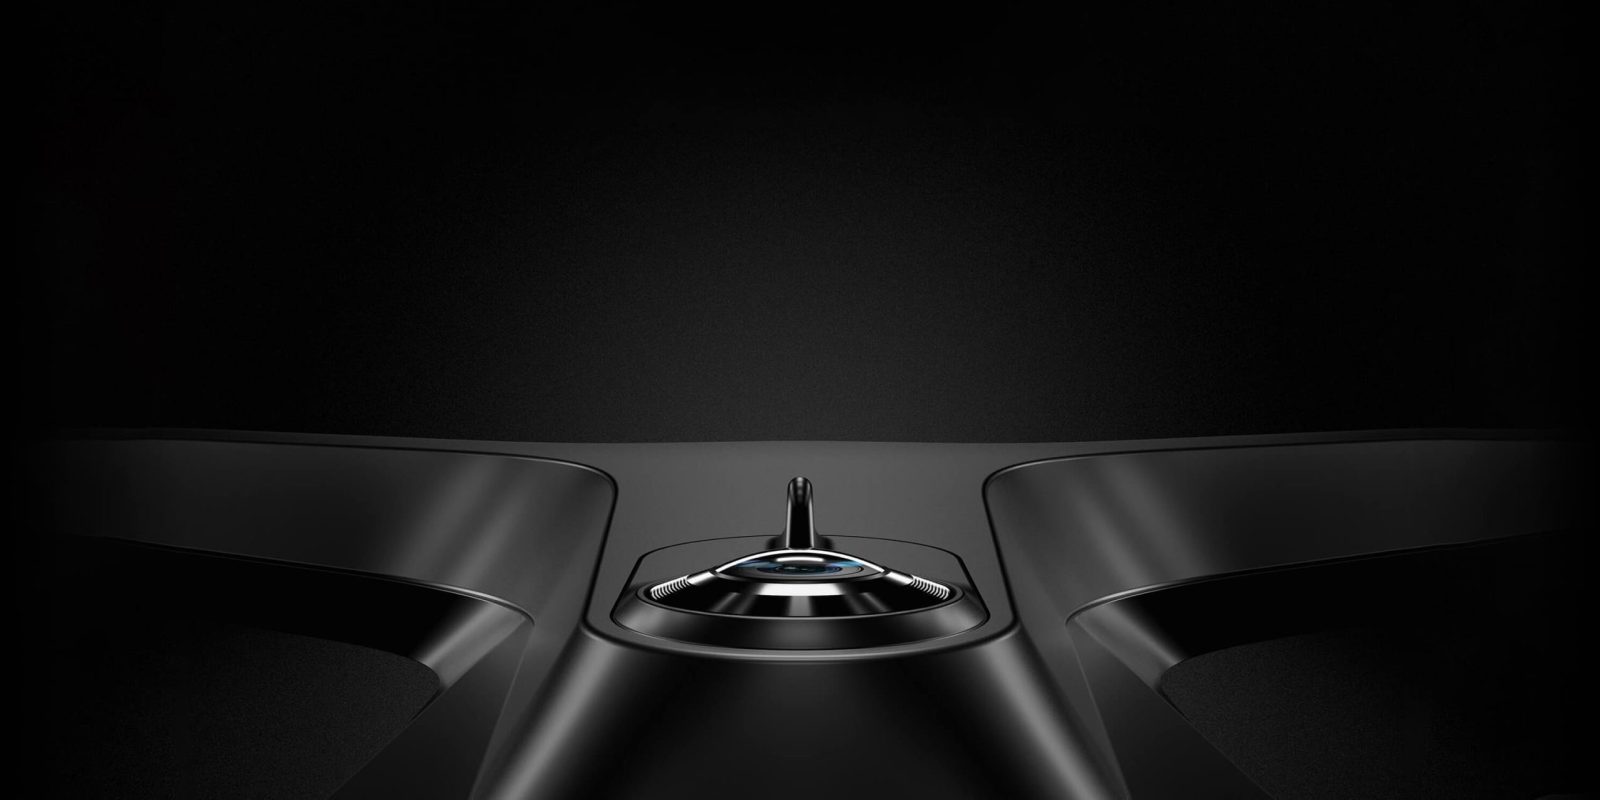 Skydio teases successor R1 drone coming this fall. Possible DJI Mavic 2 Pro competitor?